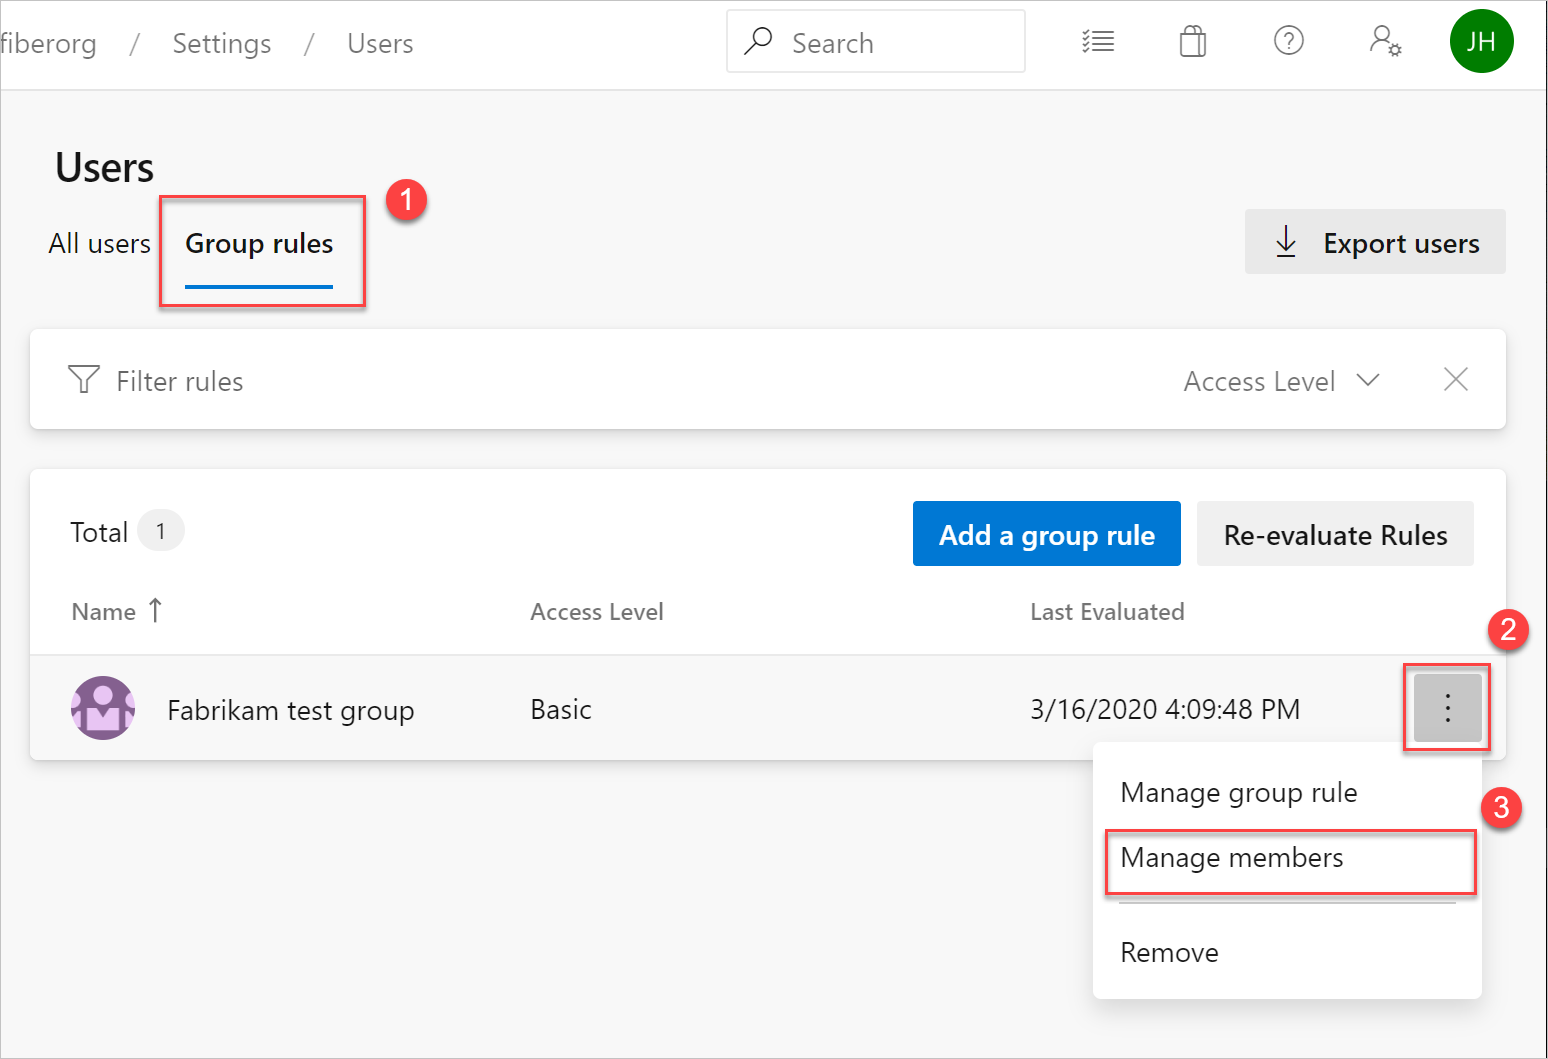 Screenshot shows highlighted group rule for managing members.